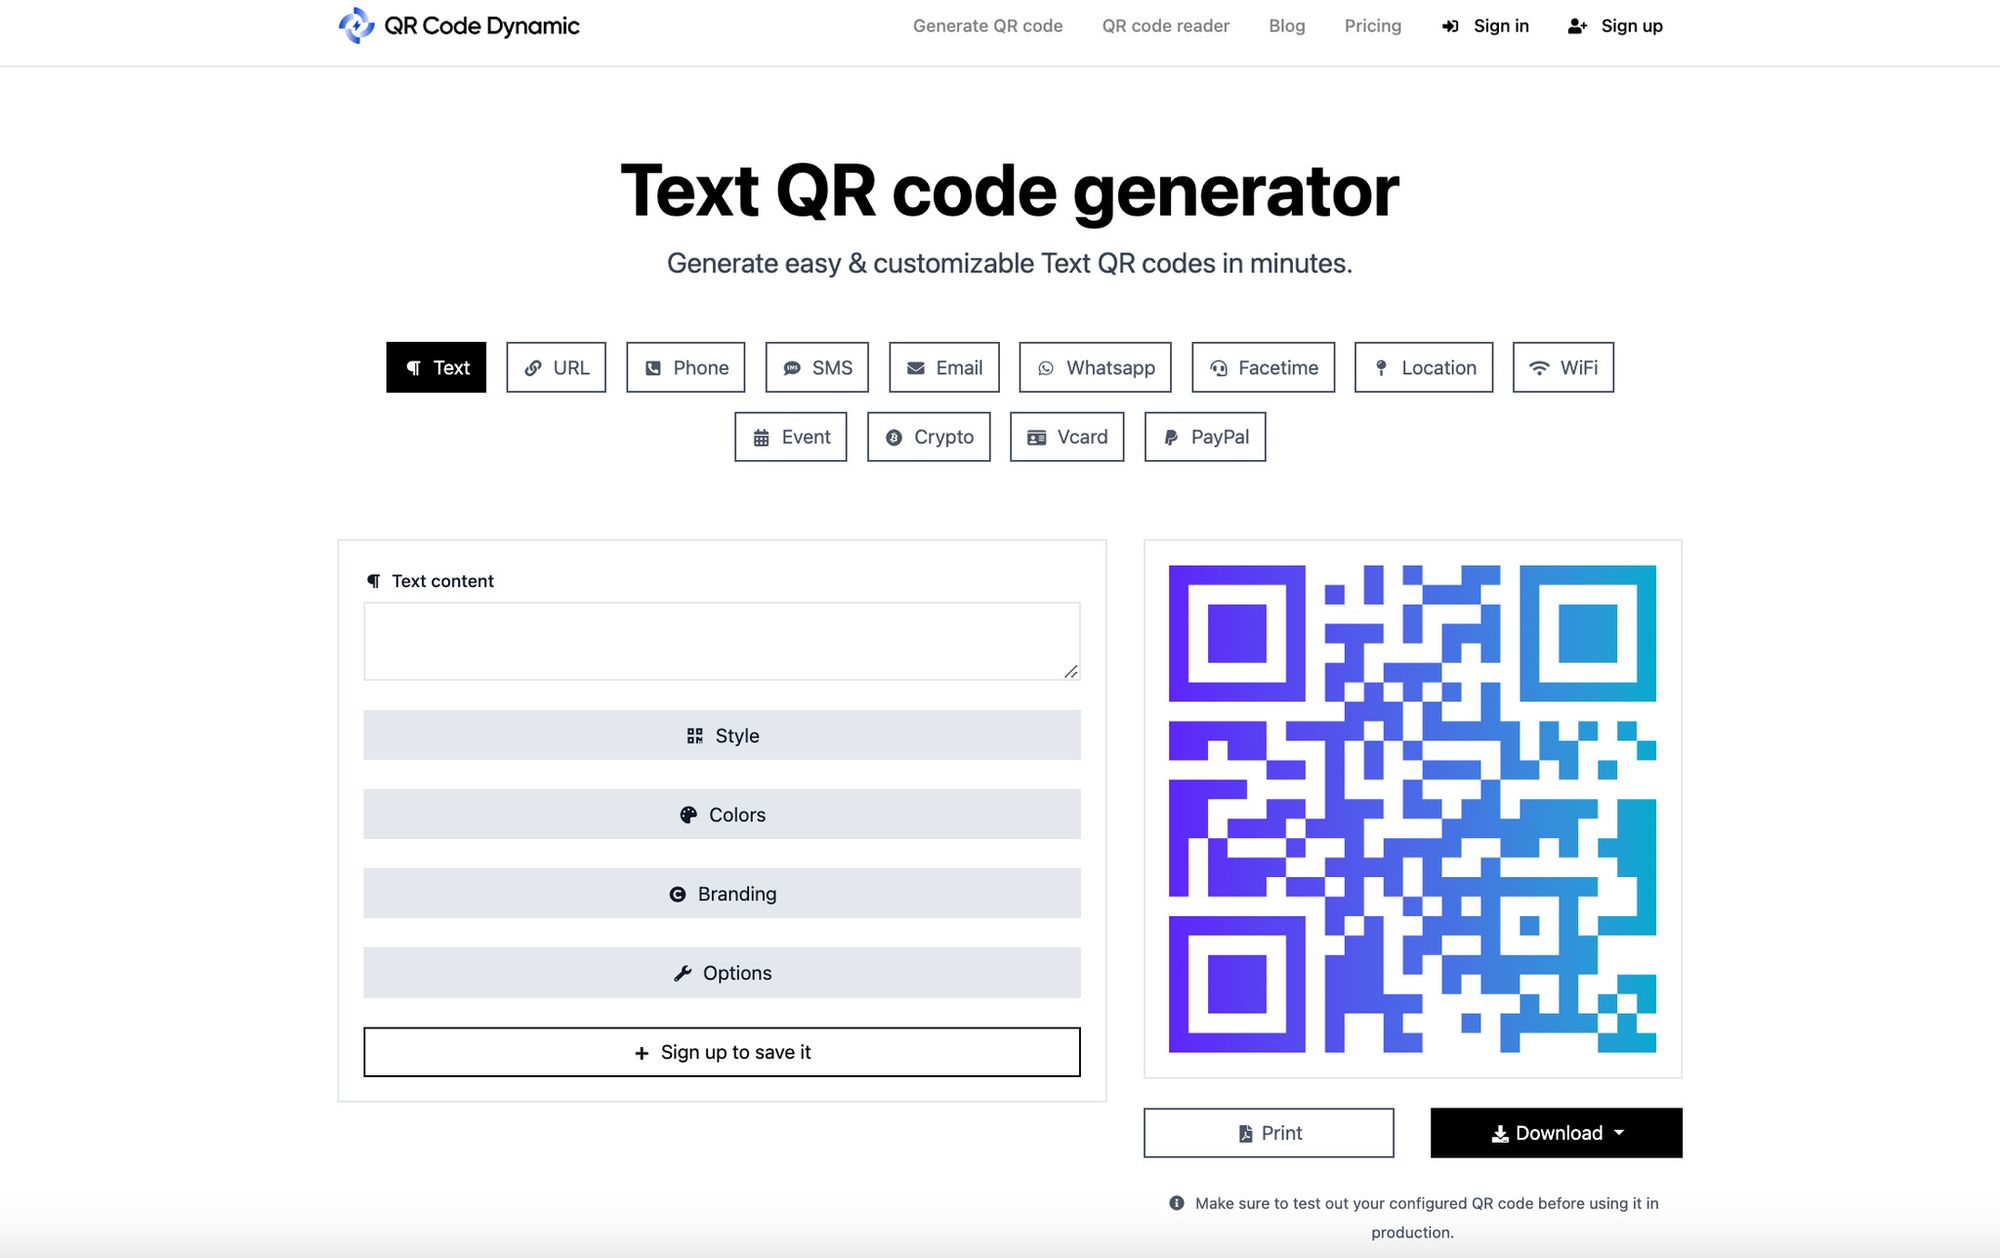 a screenshot of the landing page of generating a QR code with QRCodeDynamic